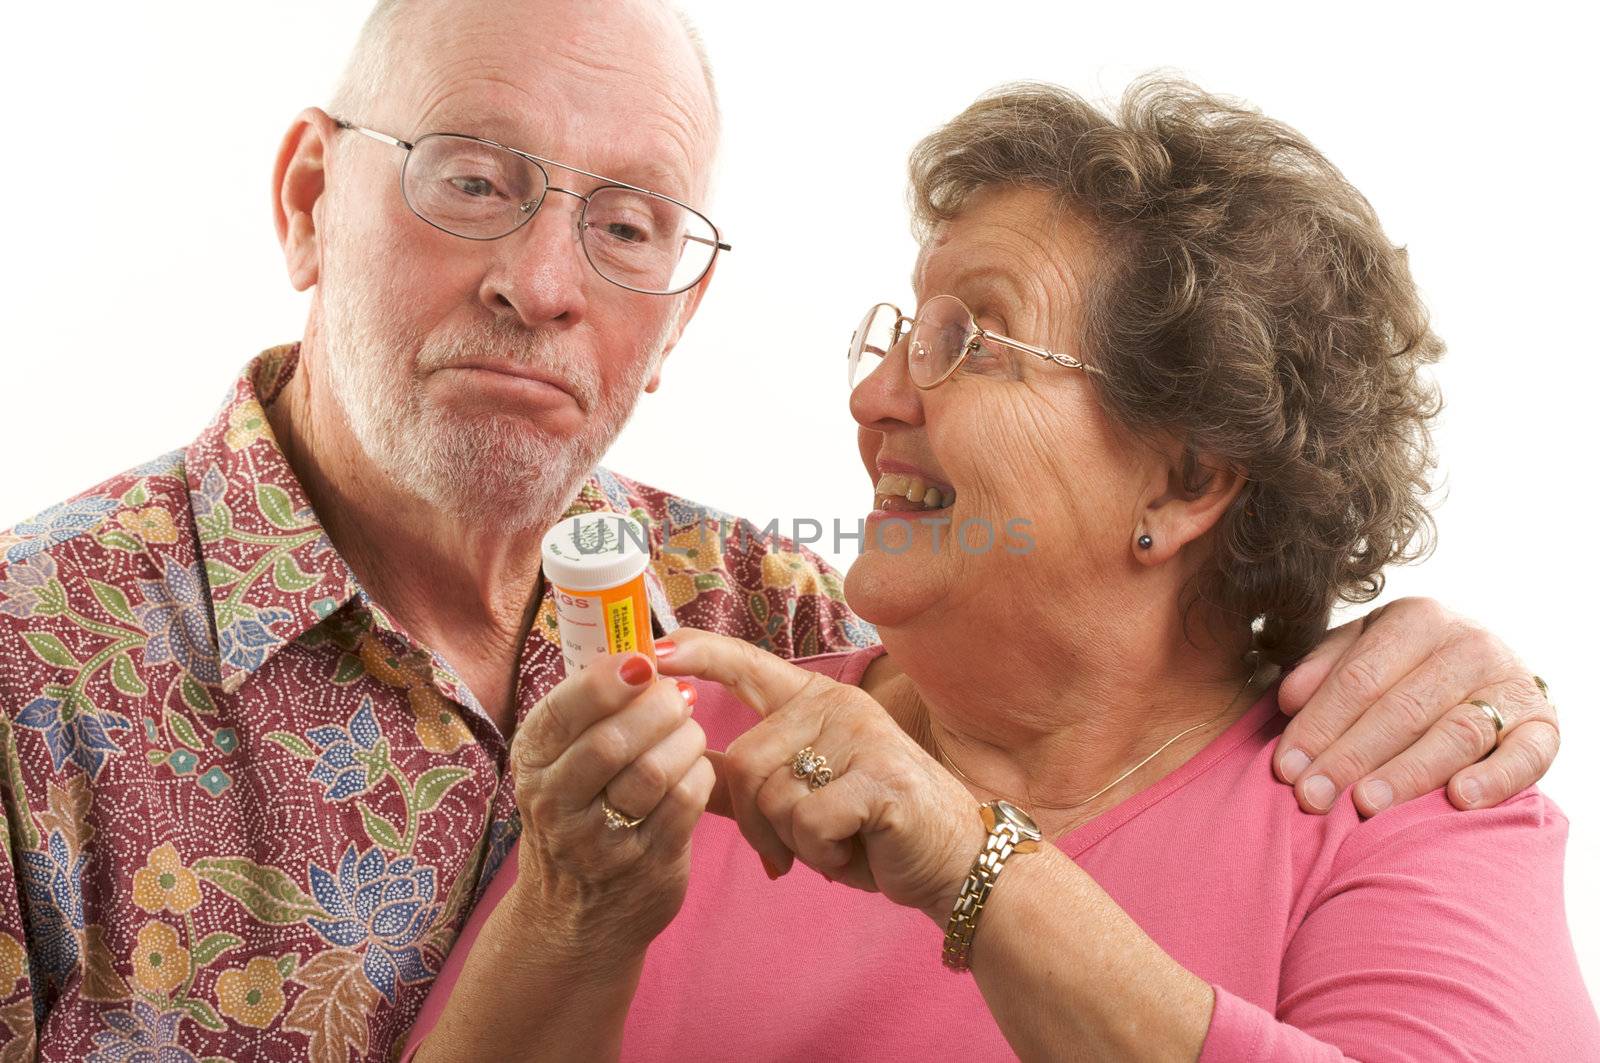 Senior Couple with Perscription Bottle by Feverpitched